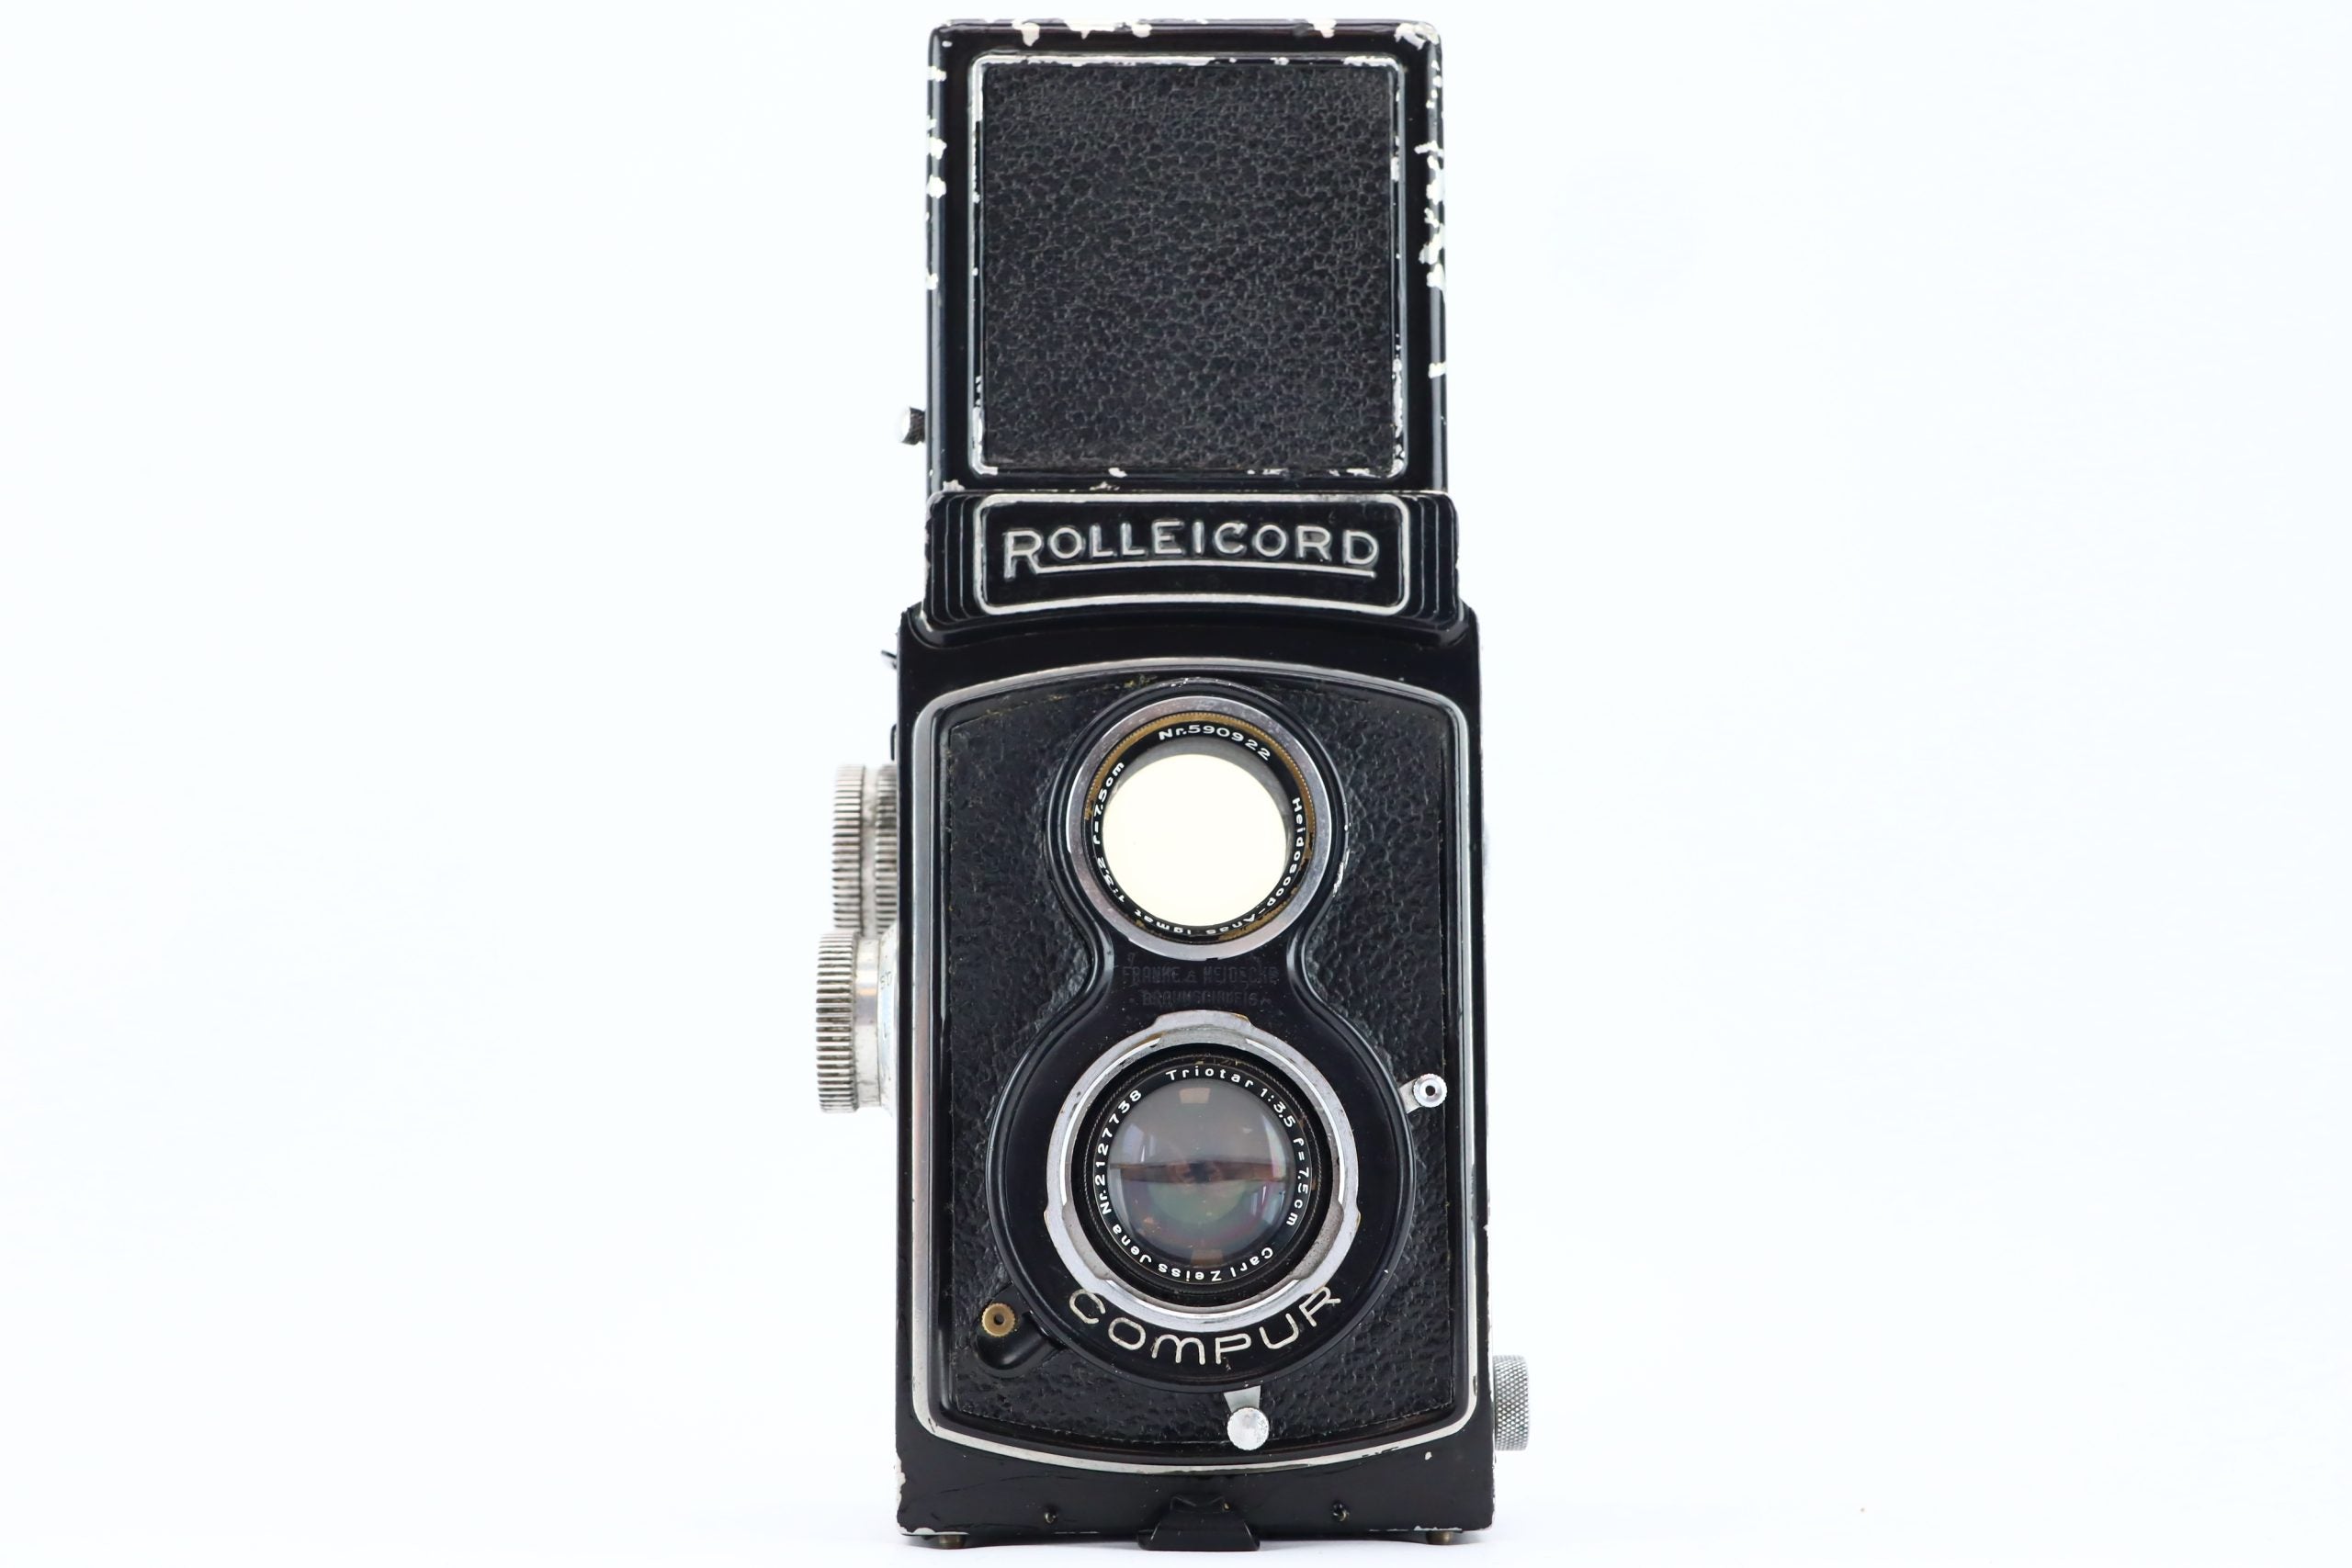 Rolleicord 75mm 3,5 Carl zeiss – Hard to Find | CAMERA STORE